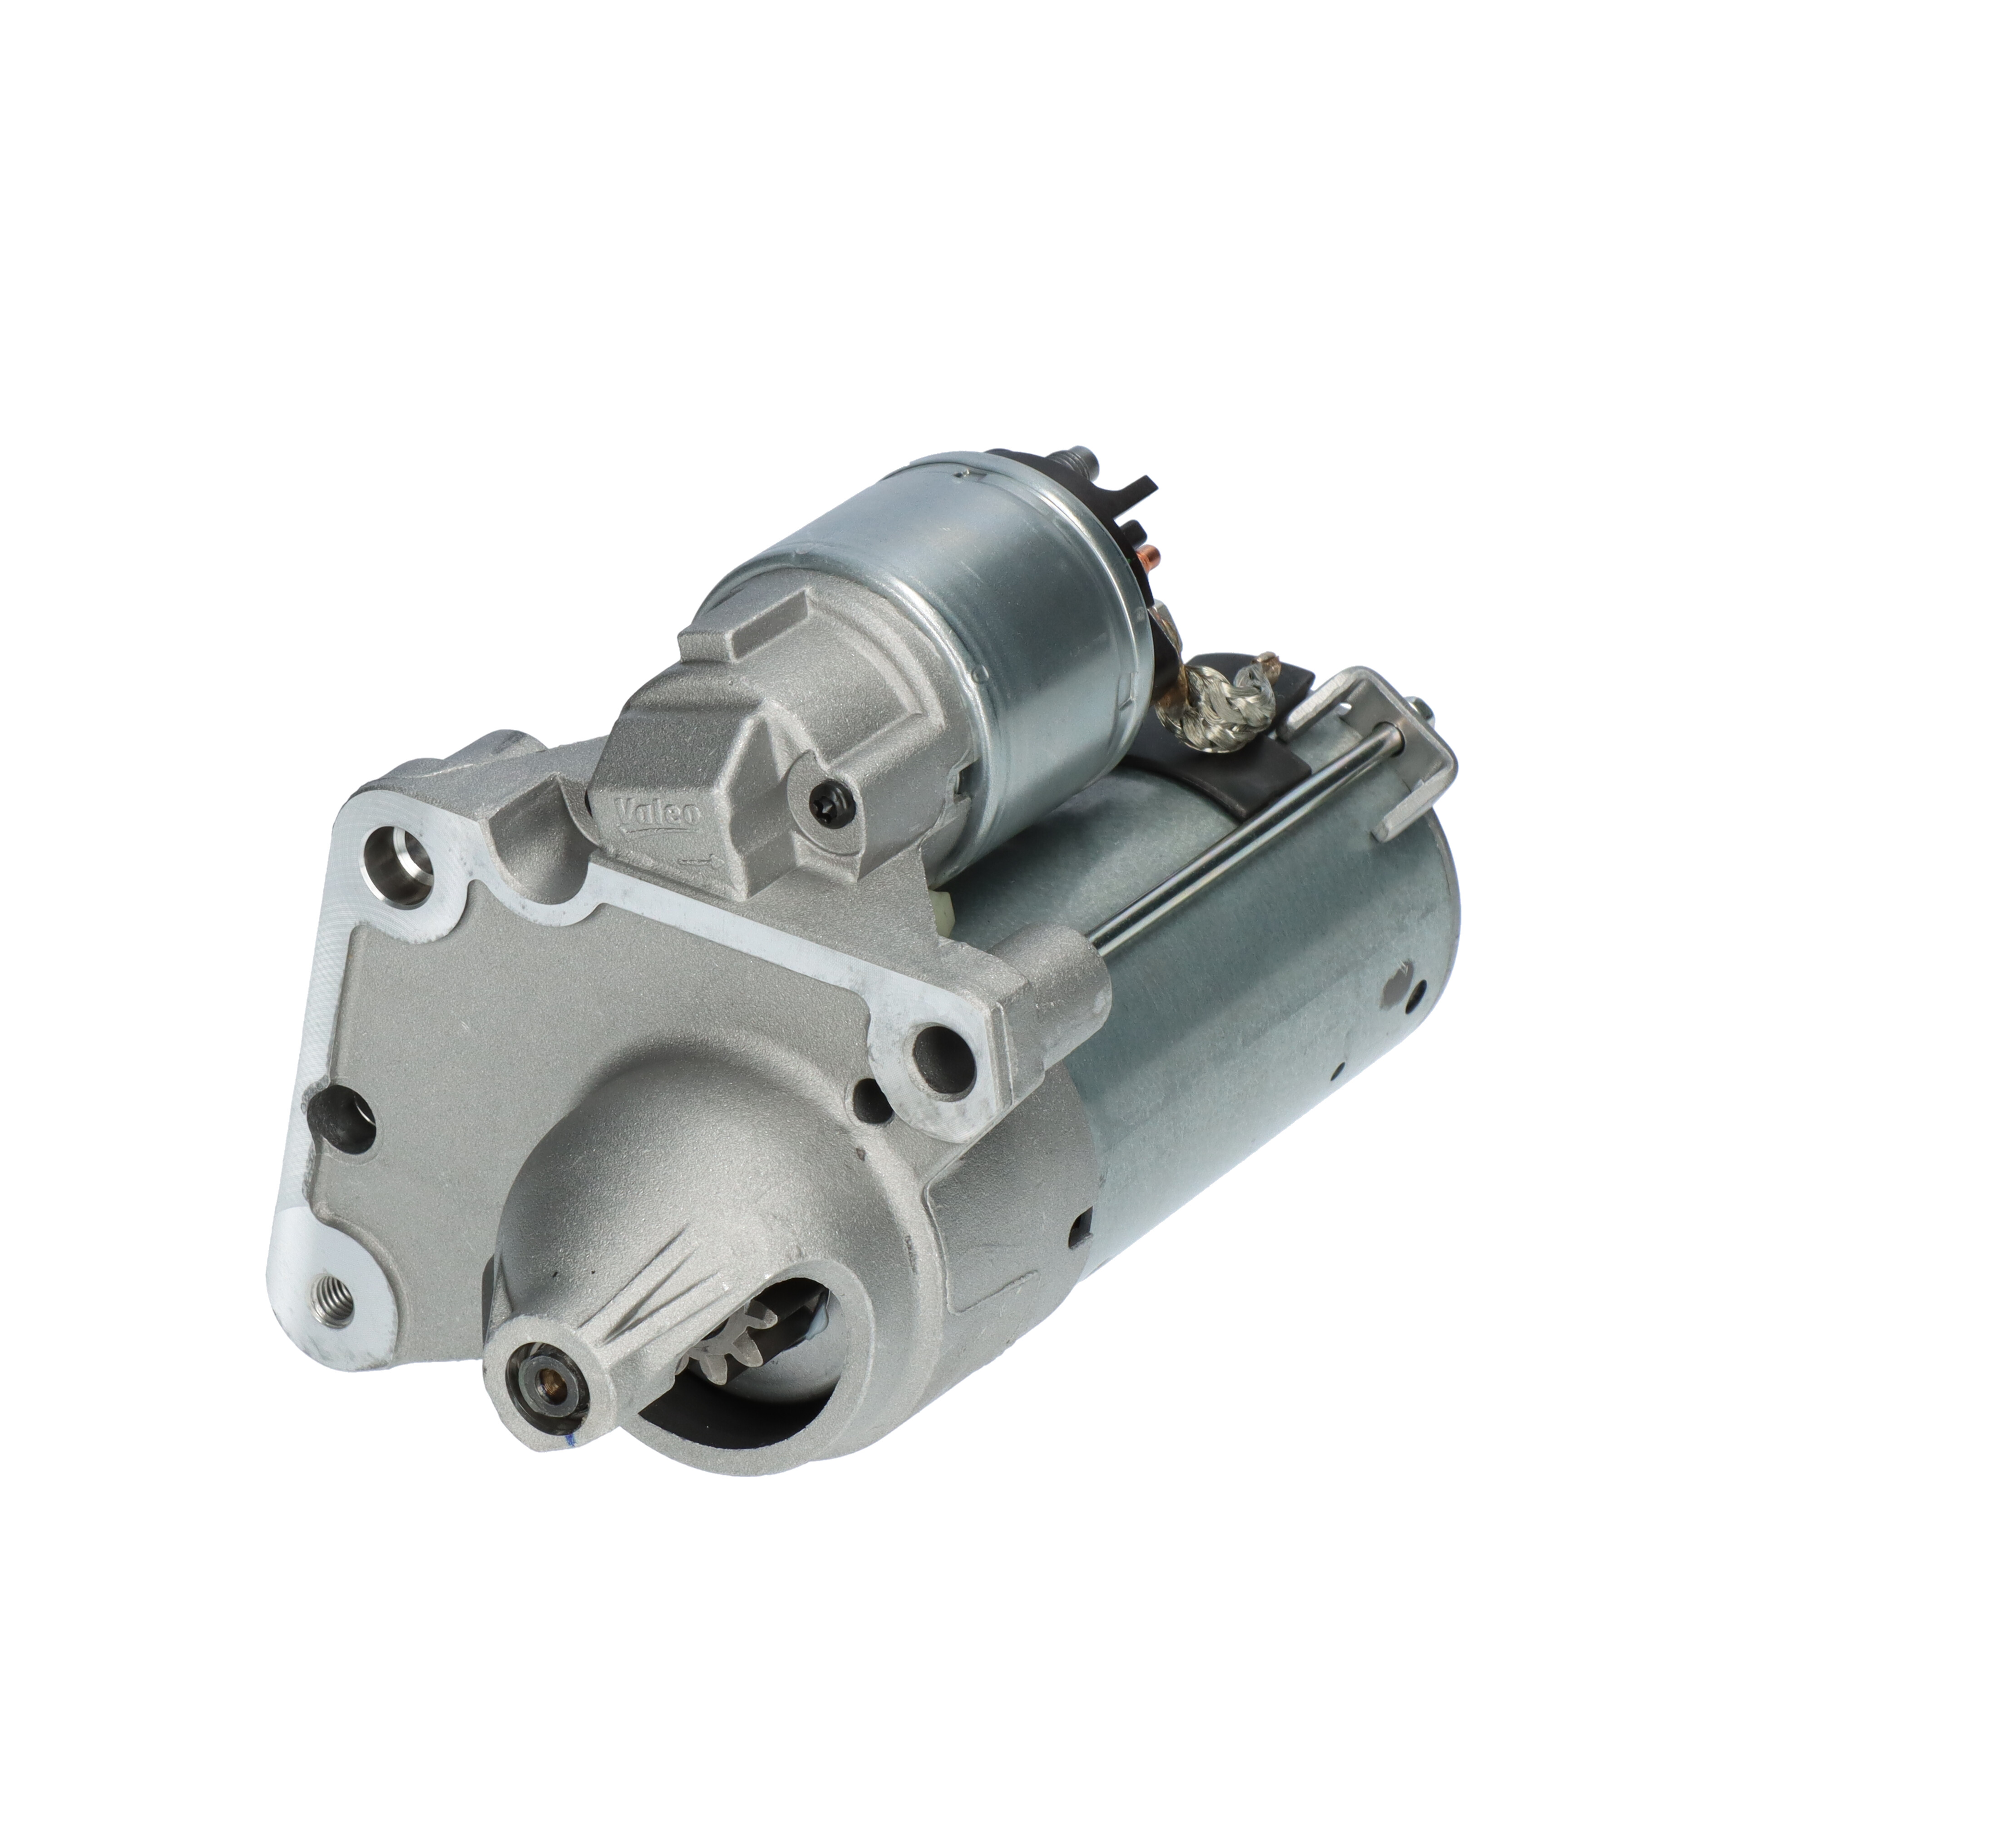 VALEO 460425 Starter motor PEUGEOT experience and price